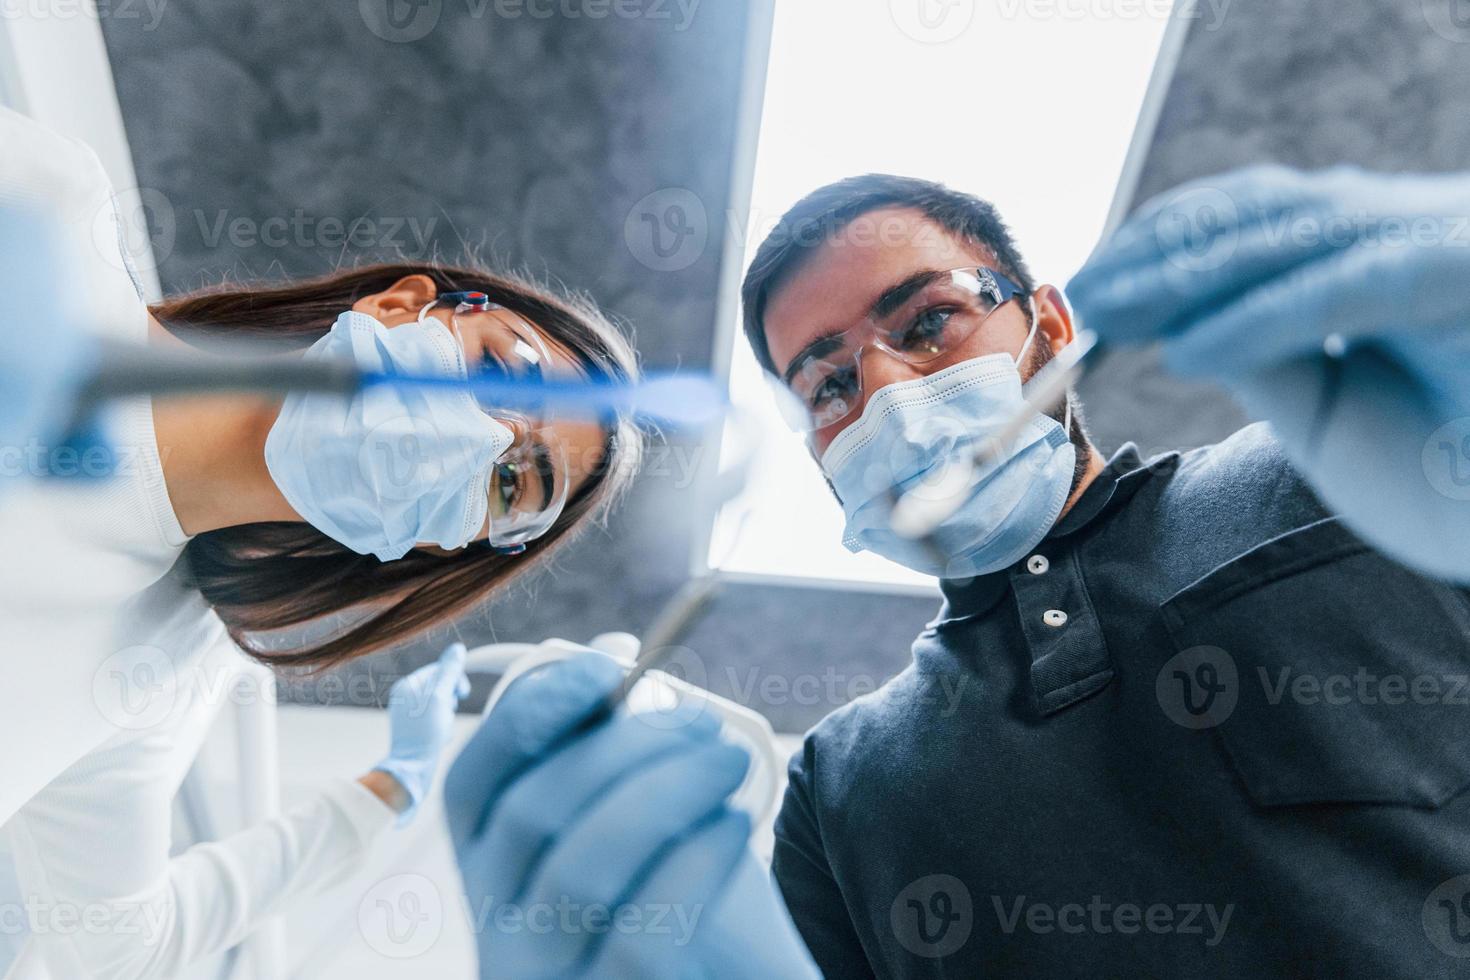 Male and female dentists working in the office together. First person view photo